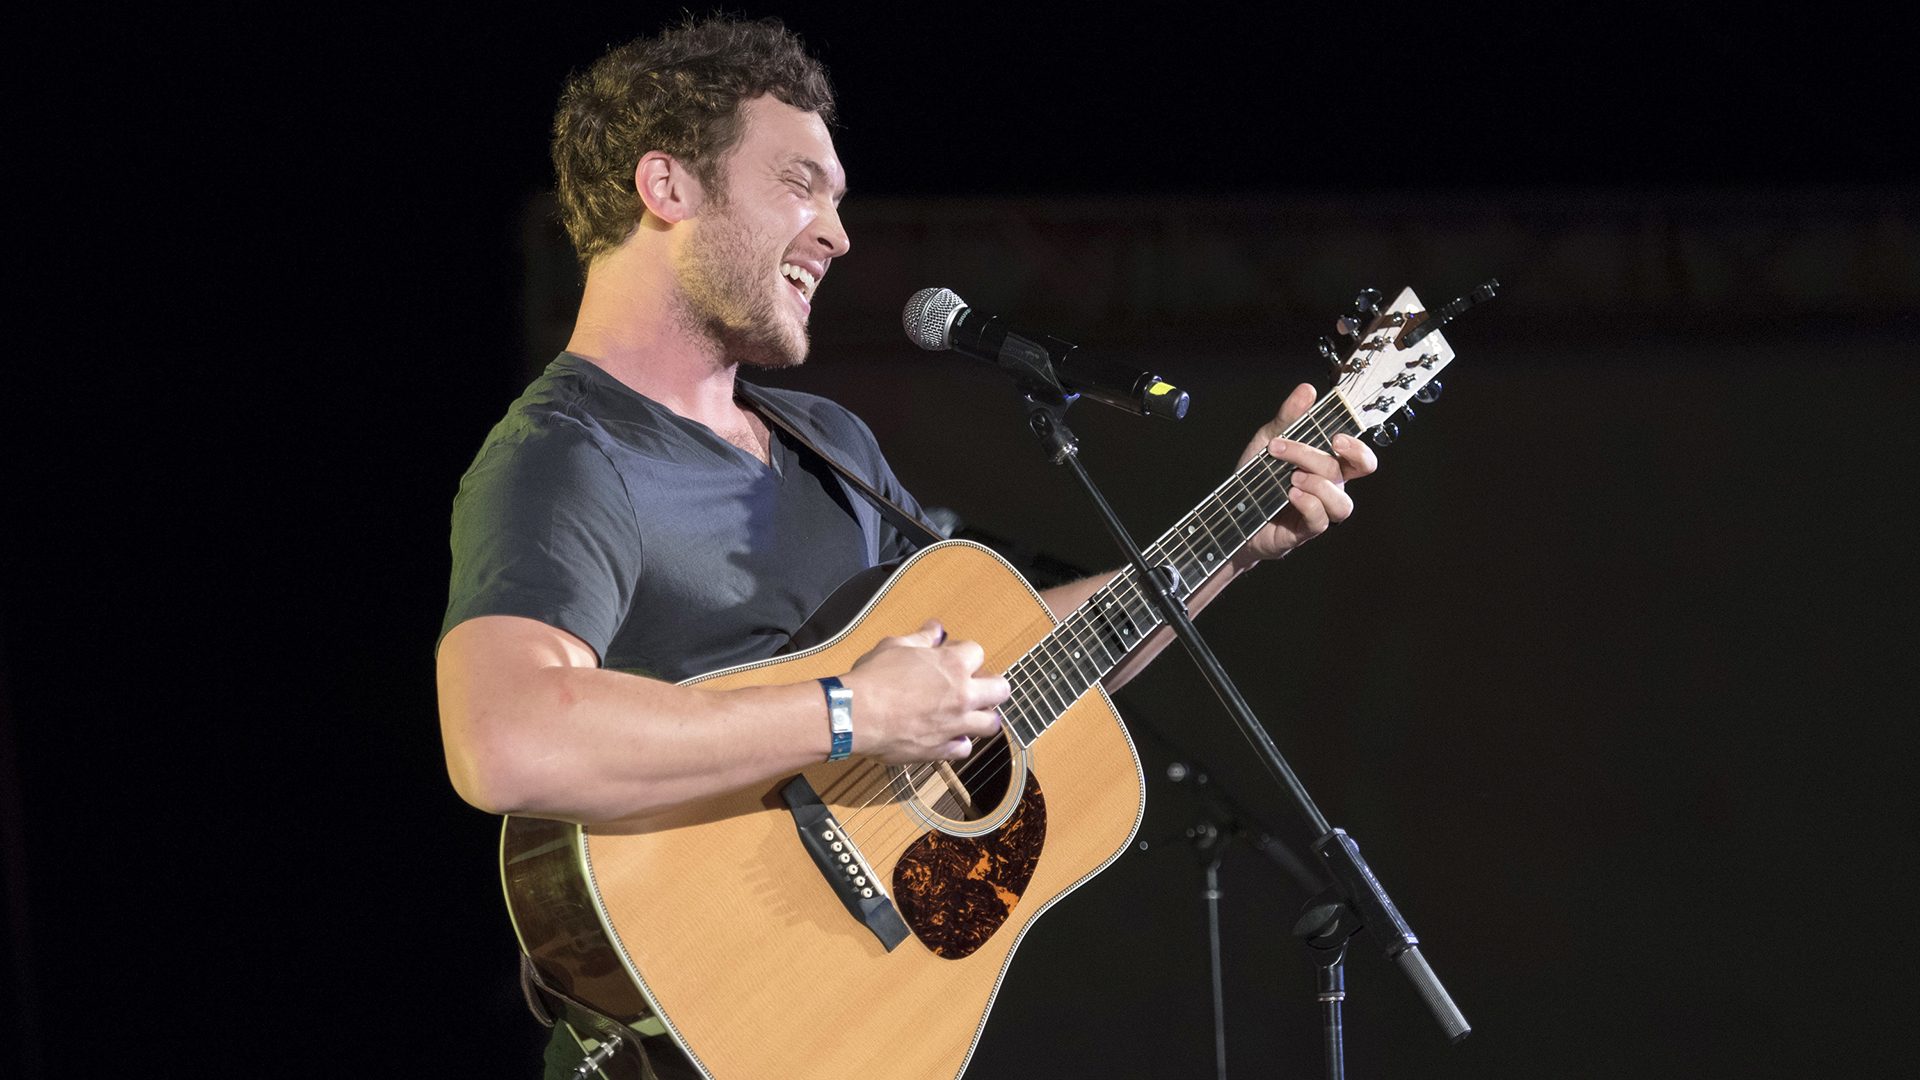 Musical artist Phillip Phillips performs for the crowd.